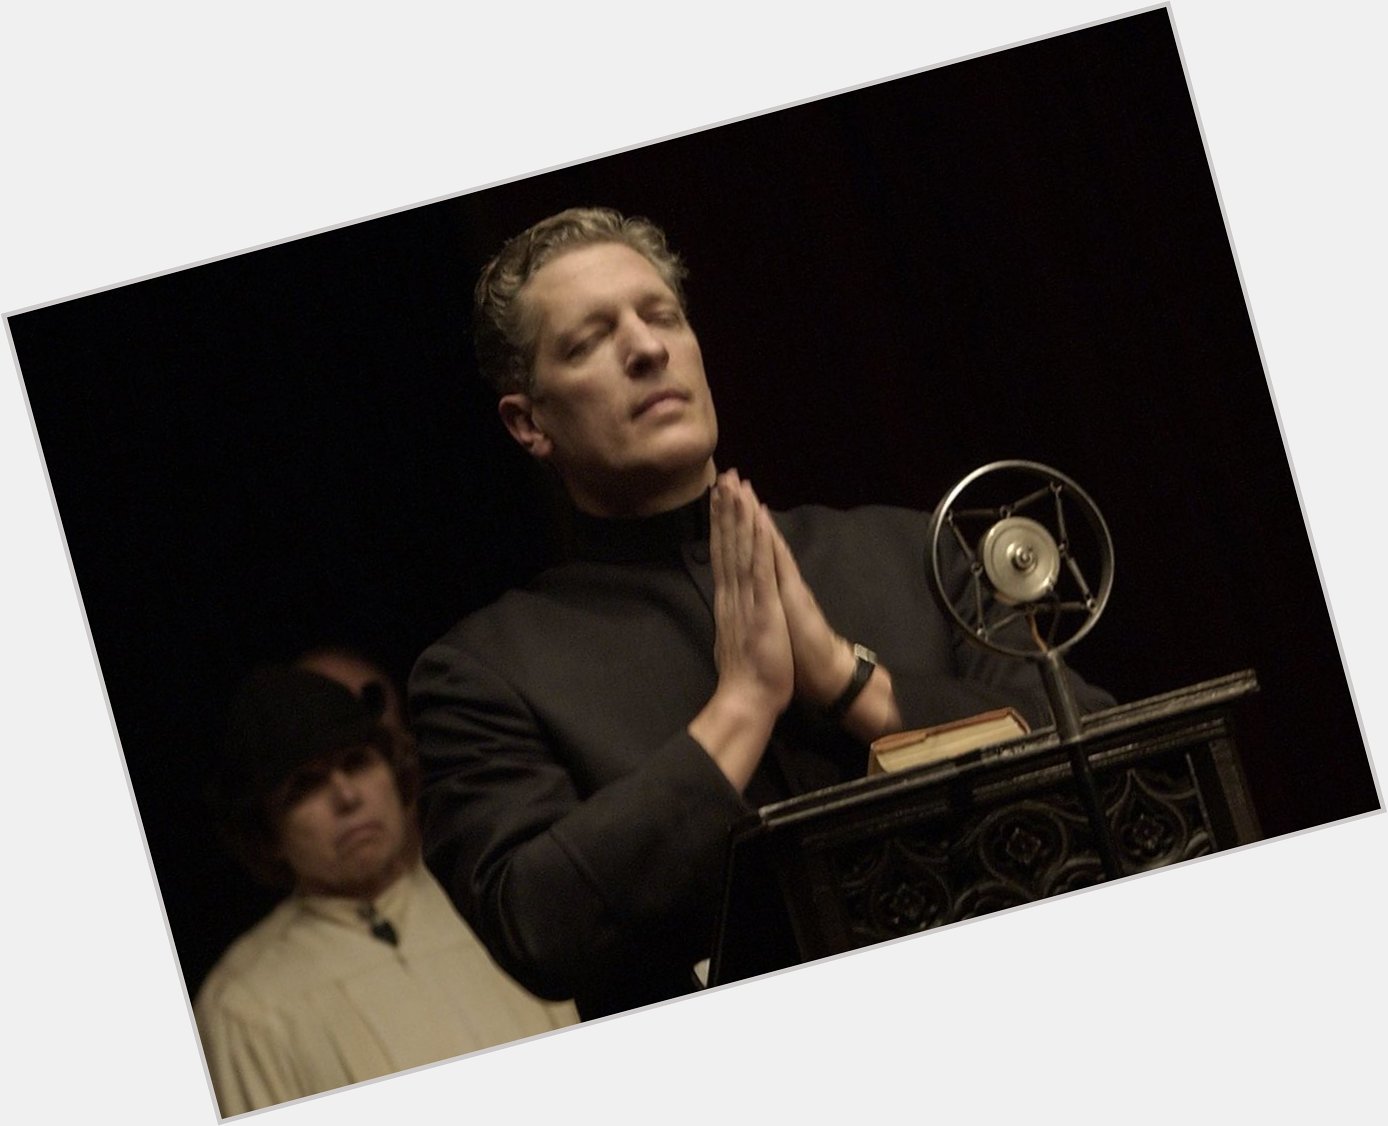   Happy birthday! Loved Clancy Brown in Carnivale as well  